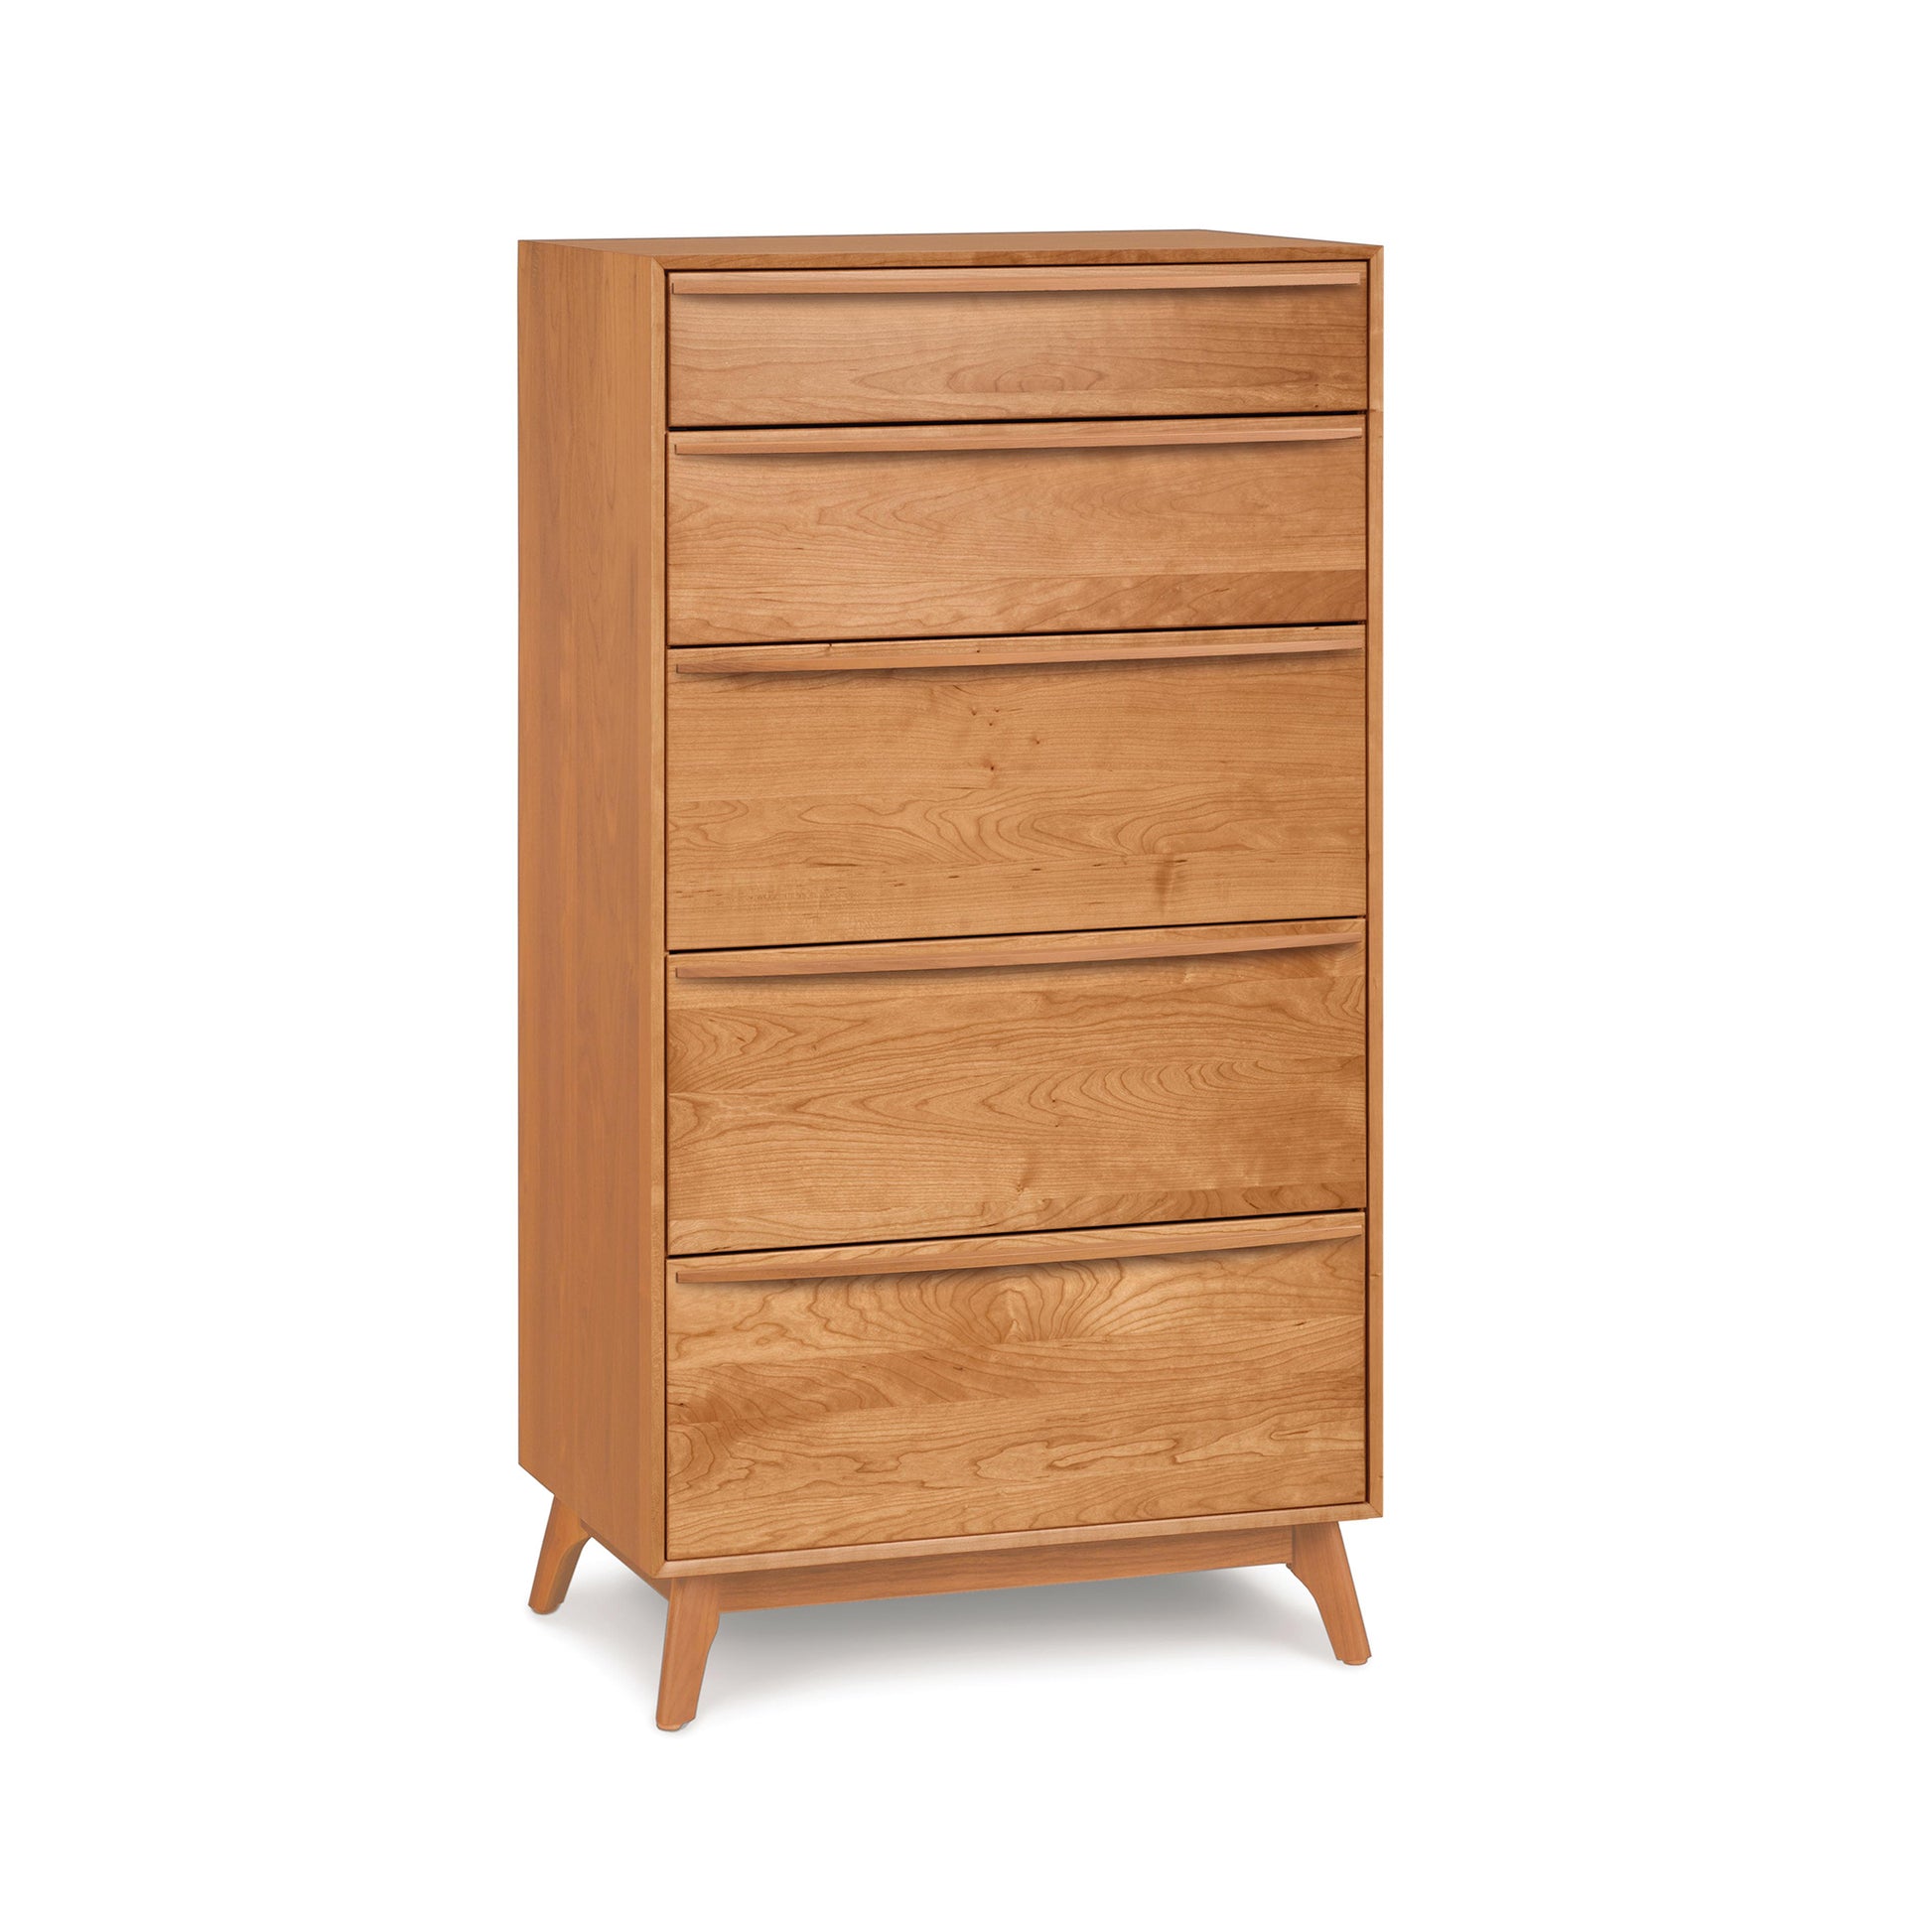 A Copeland Furniture Catalina 5-Drawer Chest standing against a white background.